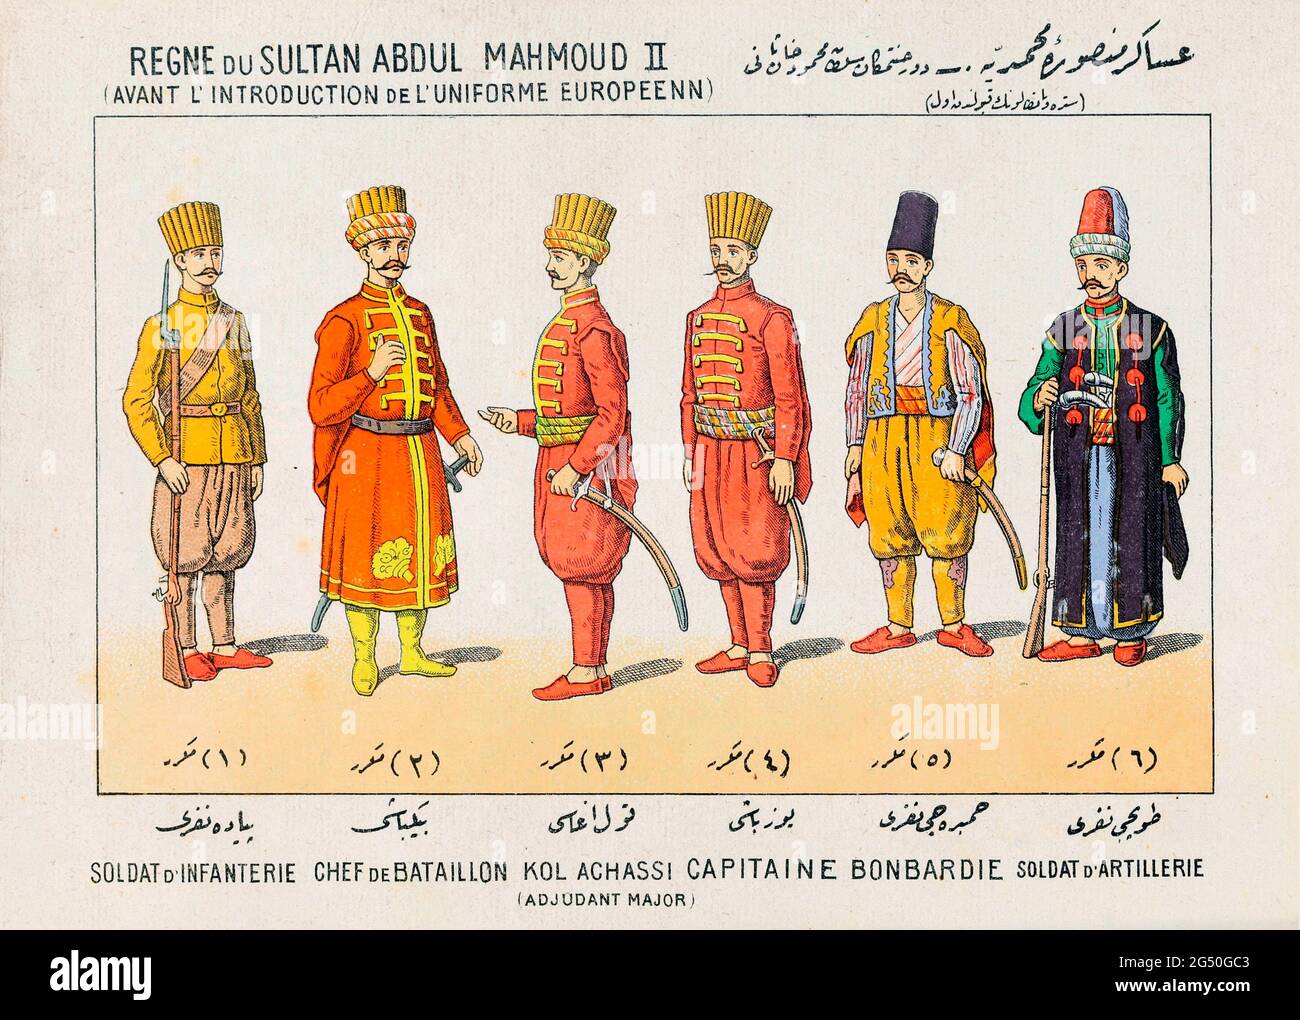 Illustrated history of Turkish Army (Ottoman Empire). Sultan Abdul Mahmud II period (reign: 1808 – 1839), before the introduction of the European unif Stock Photo